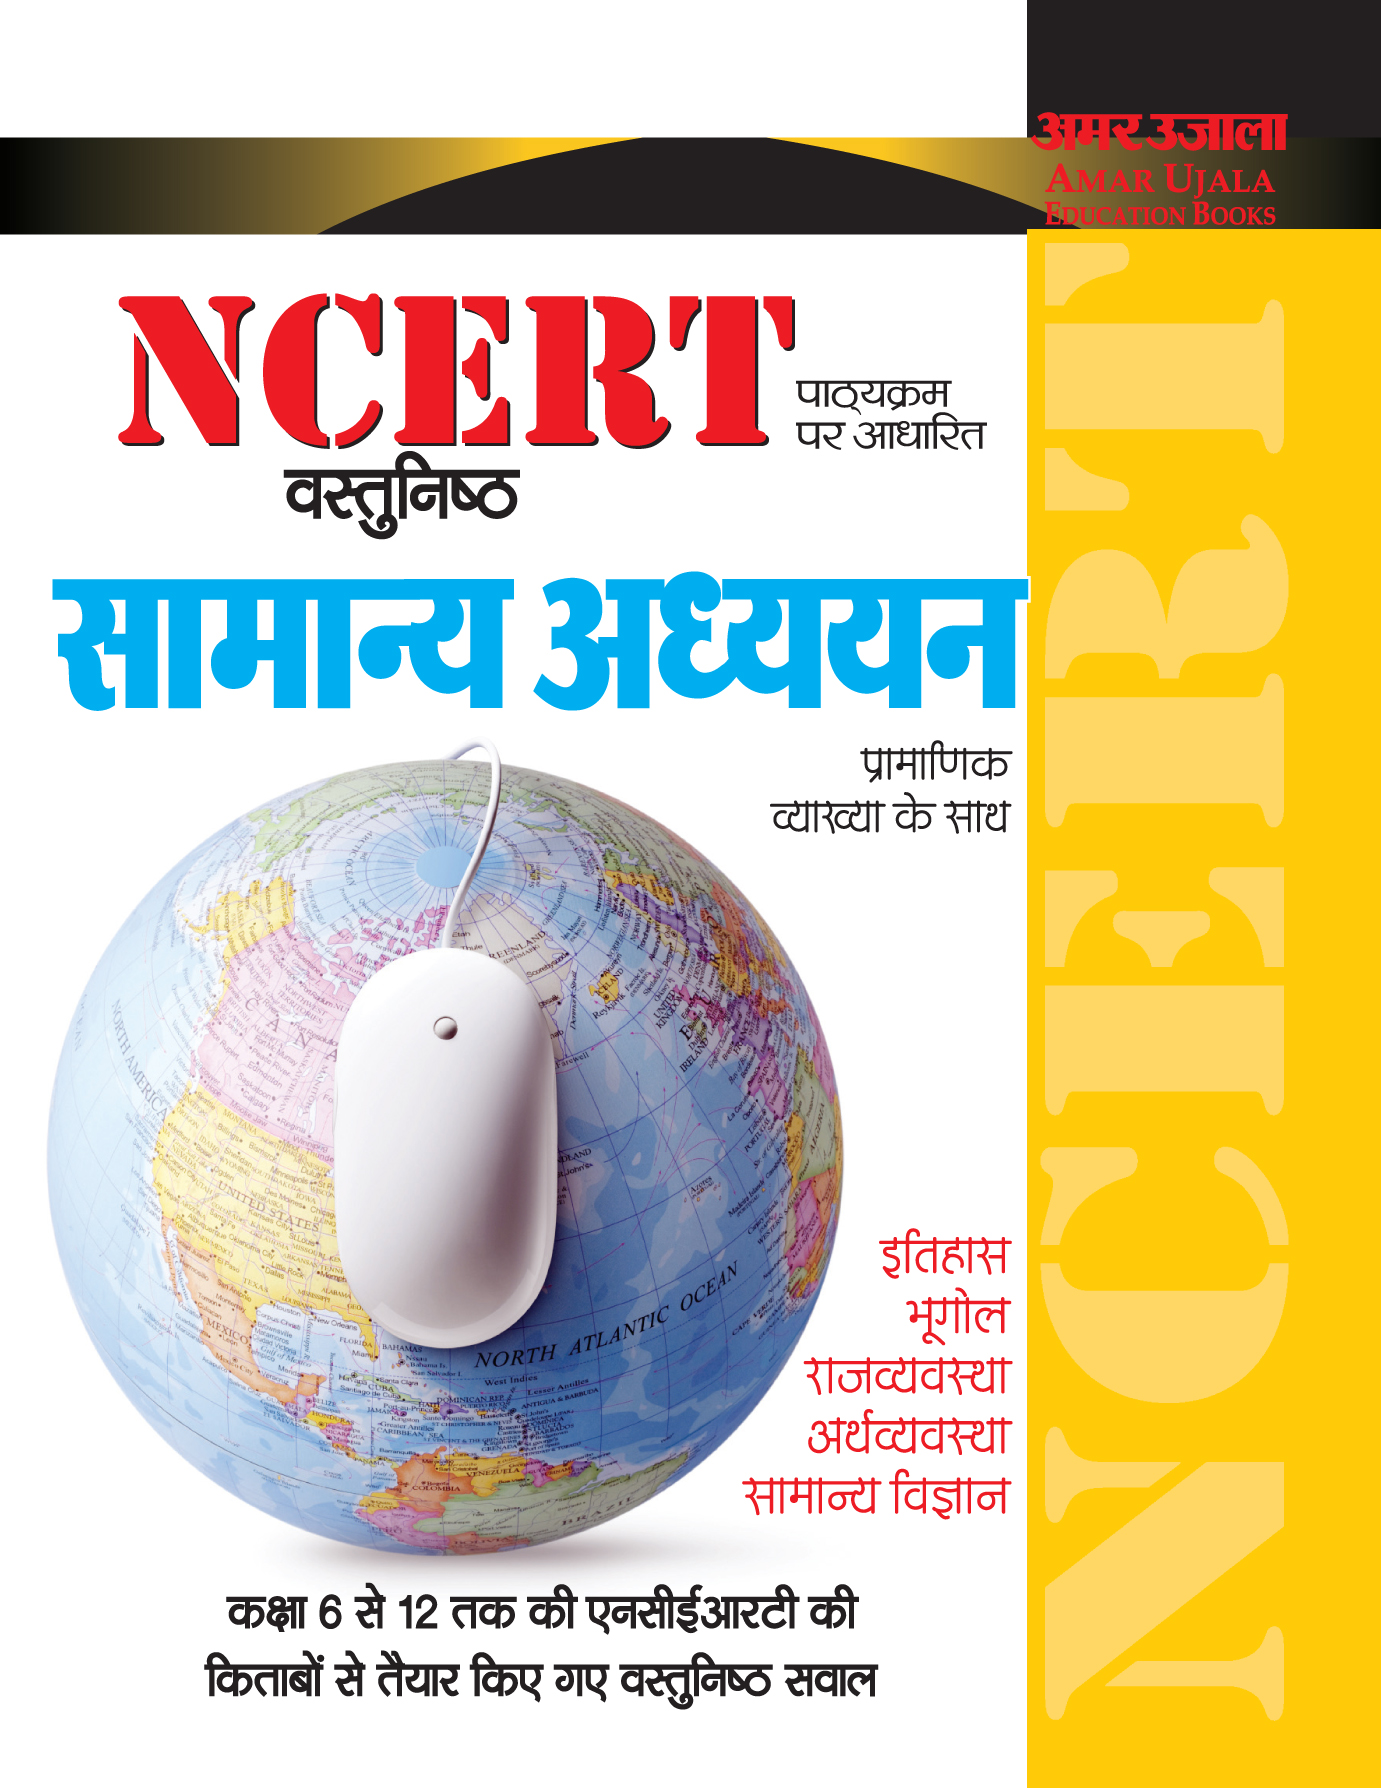 NCERT Objective General Study Combined (Hindi)